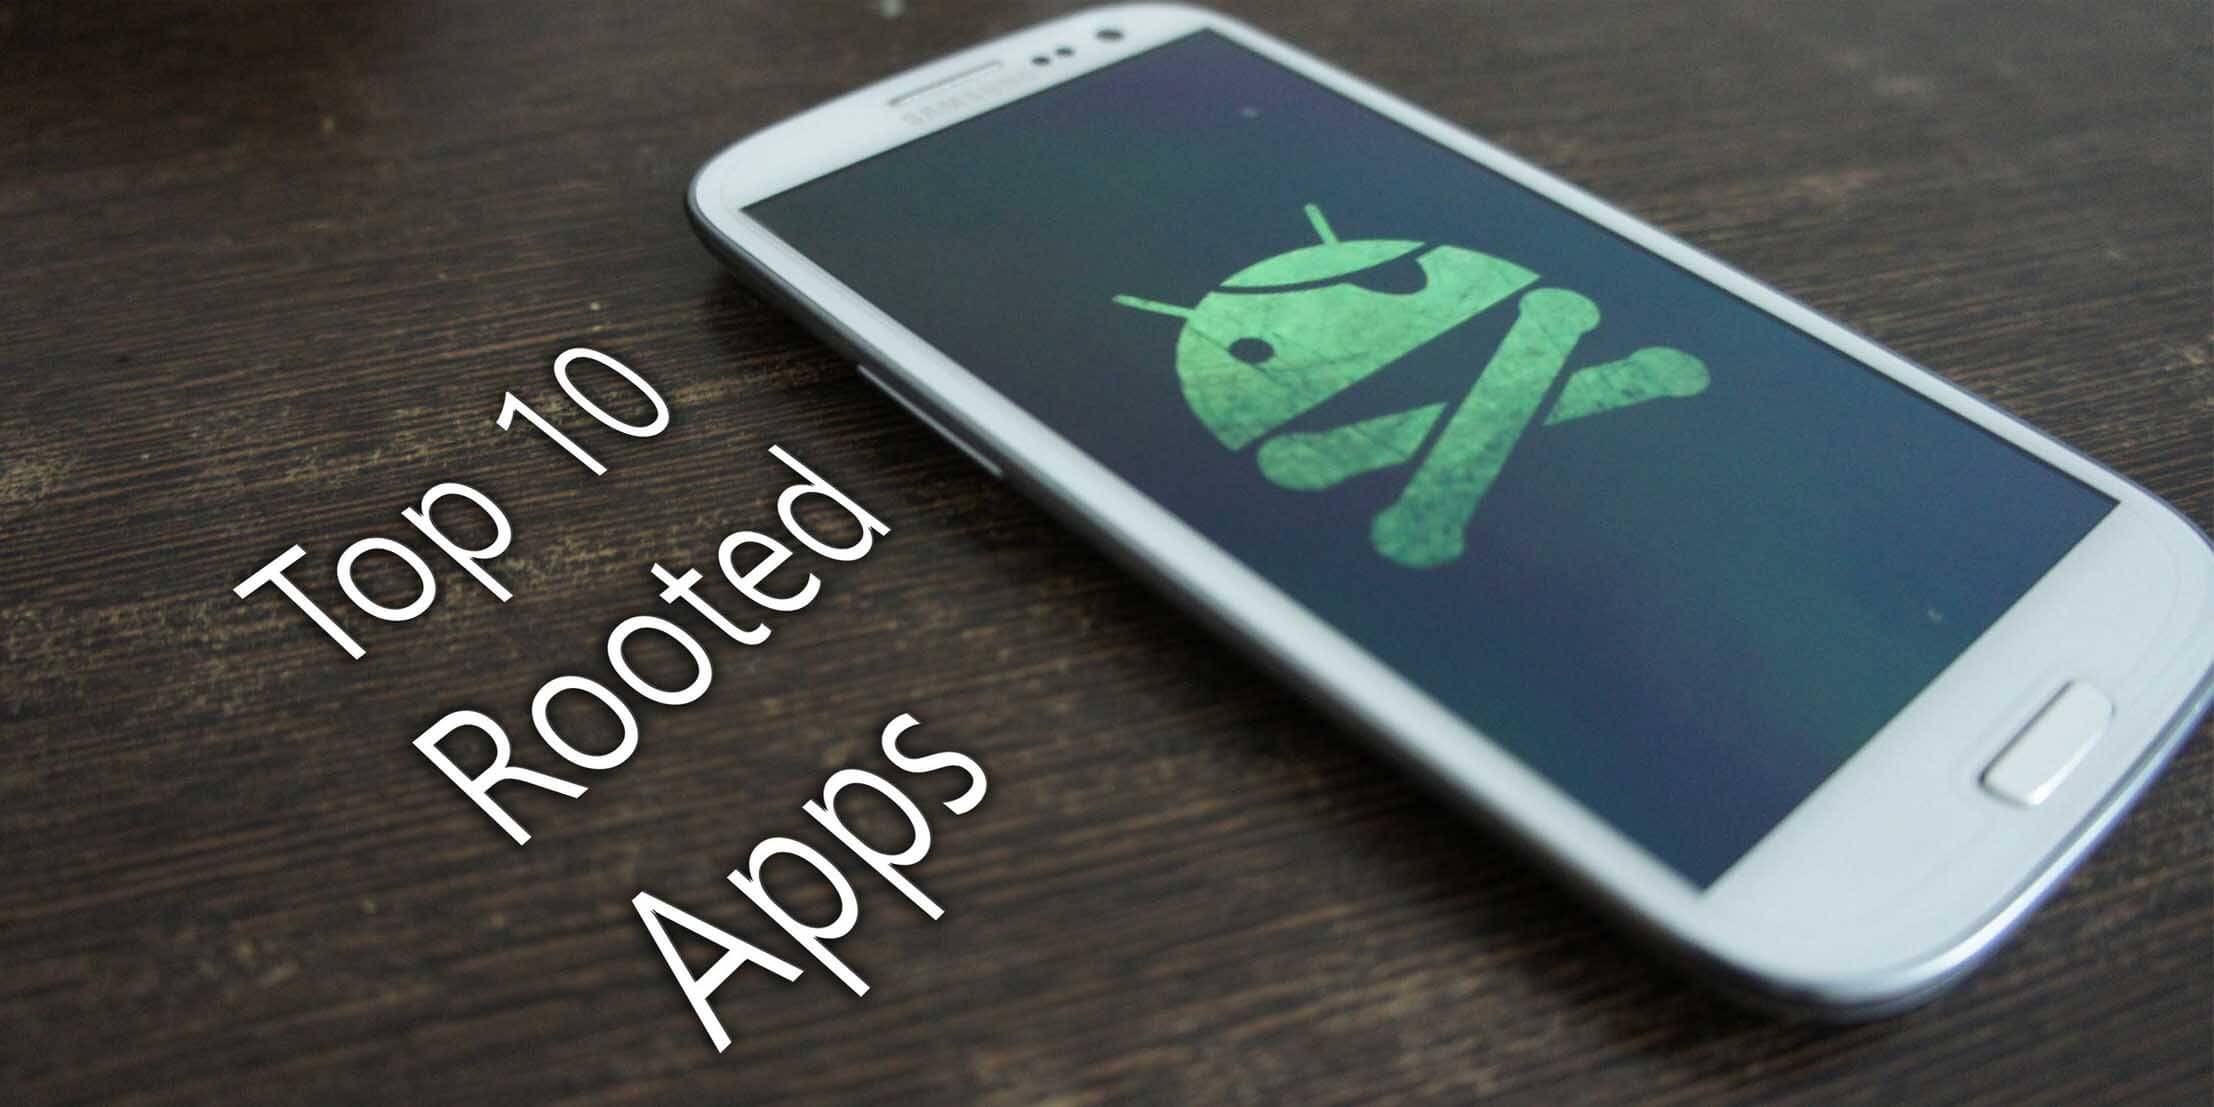 Google Play APK root. Root app. The King is back Android root. Https top androidd